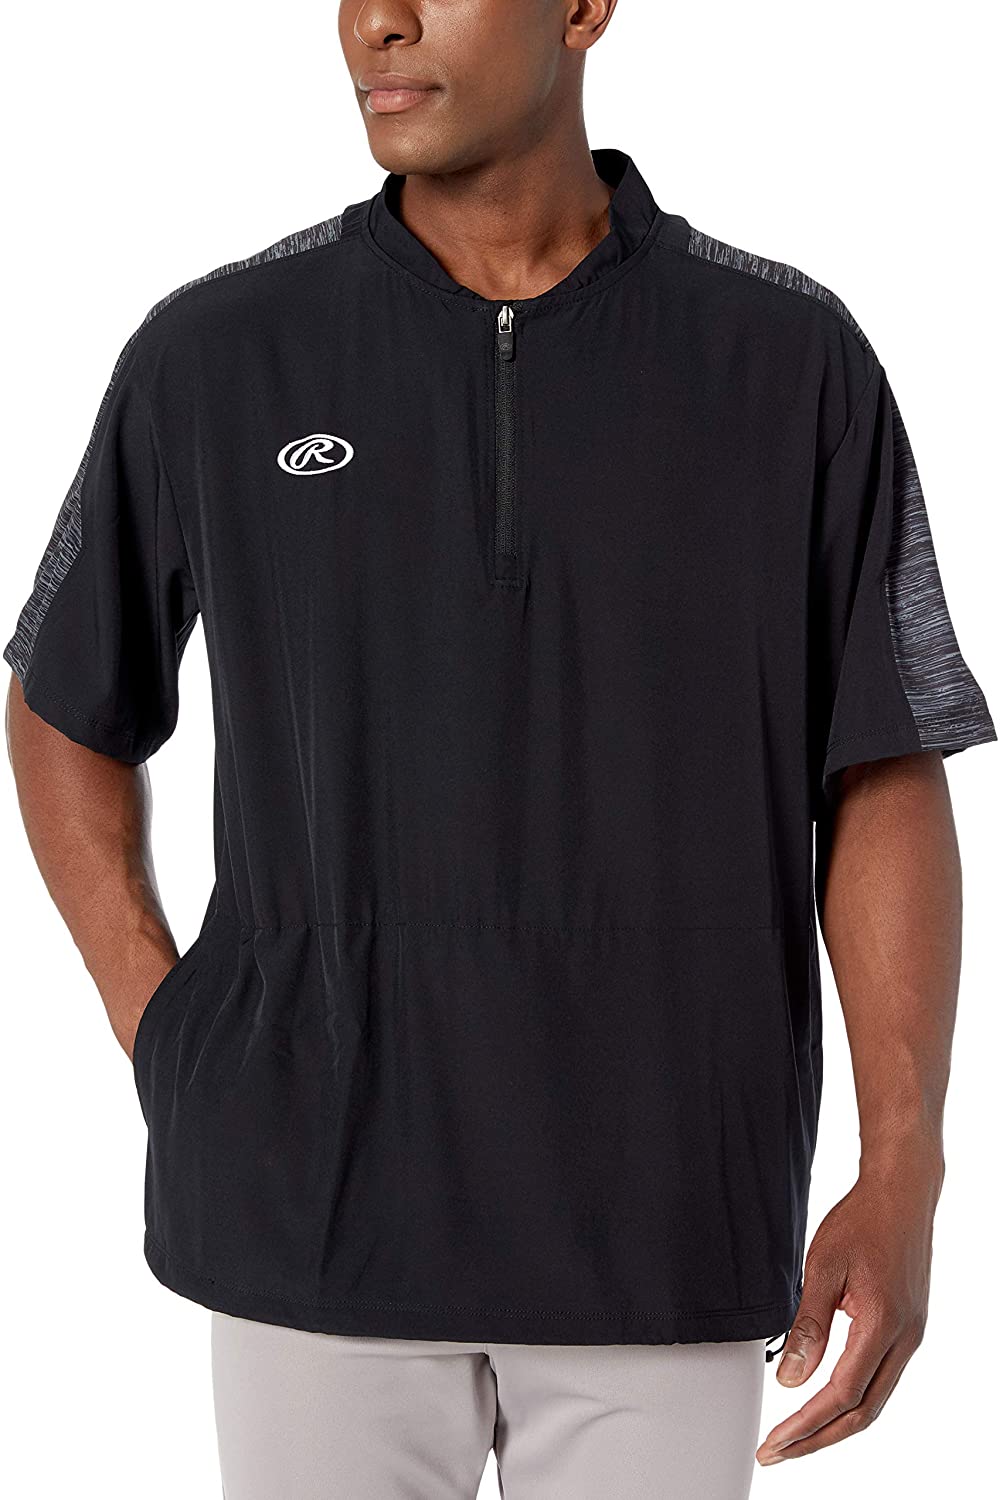 Rawlings Mens Short Sleeve Launch Cage Jacket